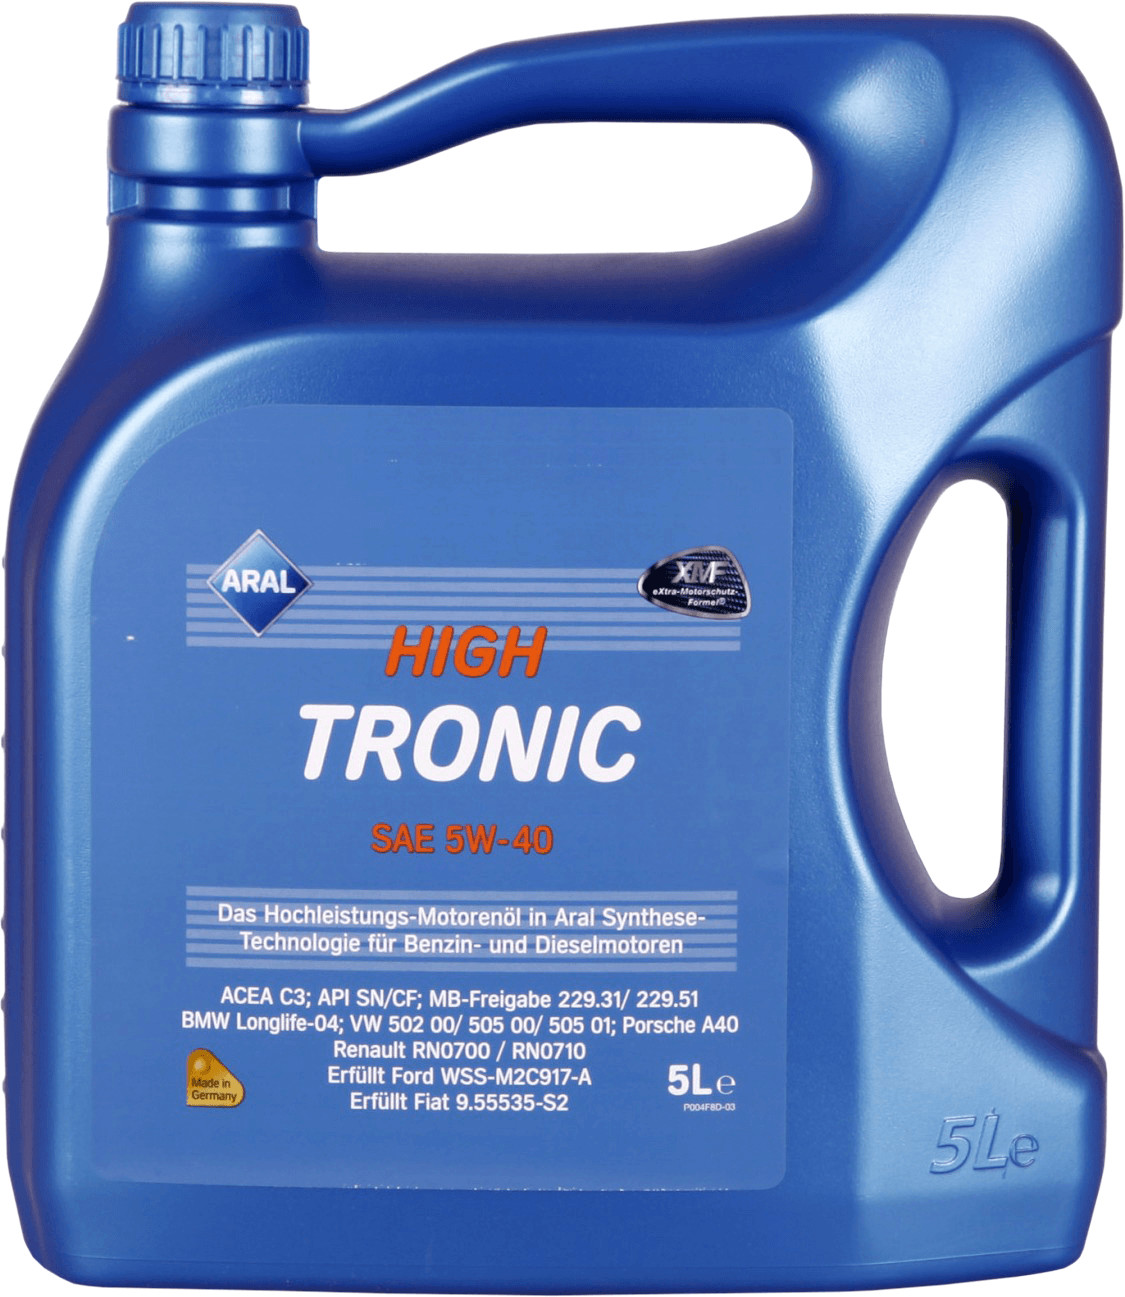 Aral HIGHTRONIC 5w-40. Aral High Tronic m SAE 5w-40. Масло Aral High Tronic 5w40 4л. Aral масло High Tronic f 5w-30 (Synt).